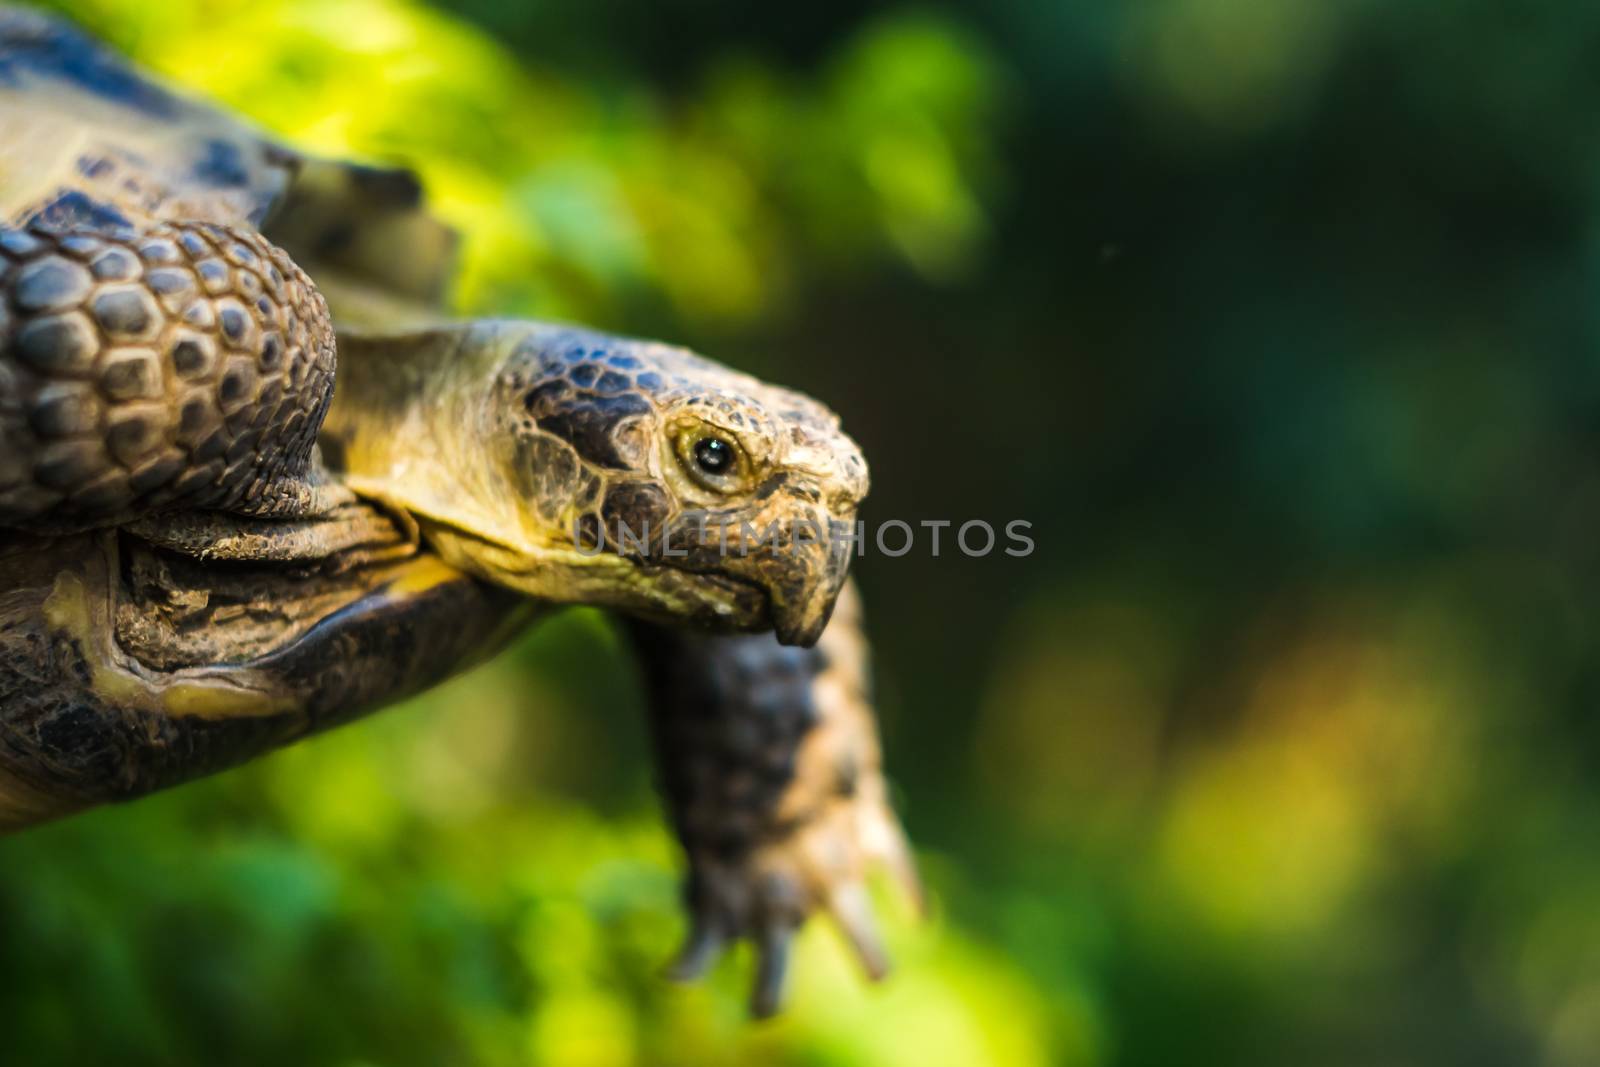 turtle close-up by darksoul72